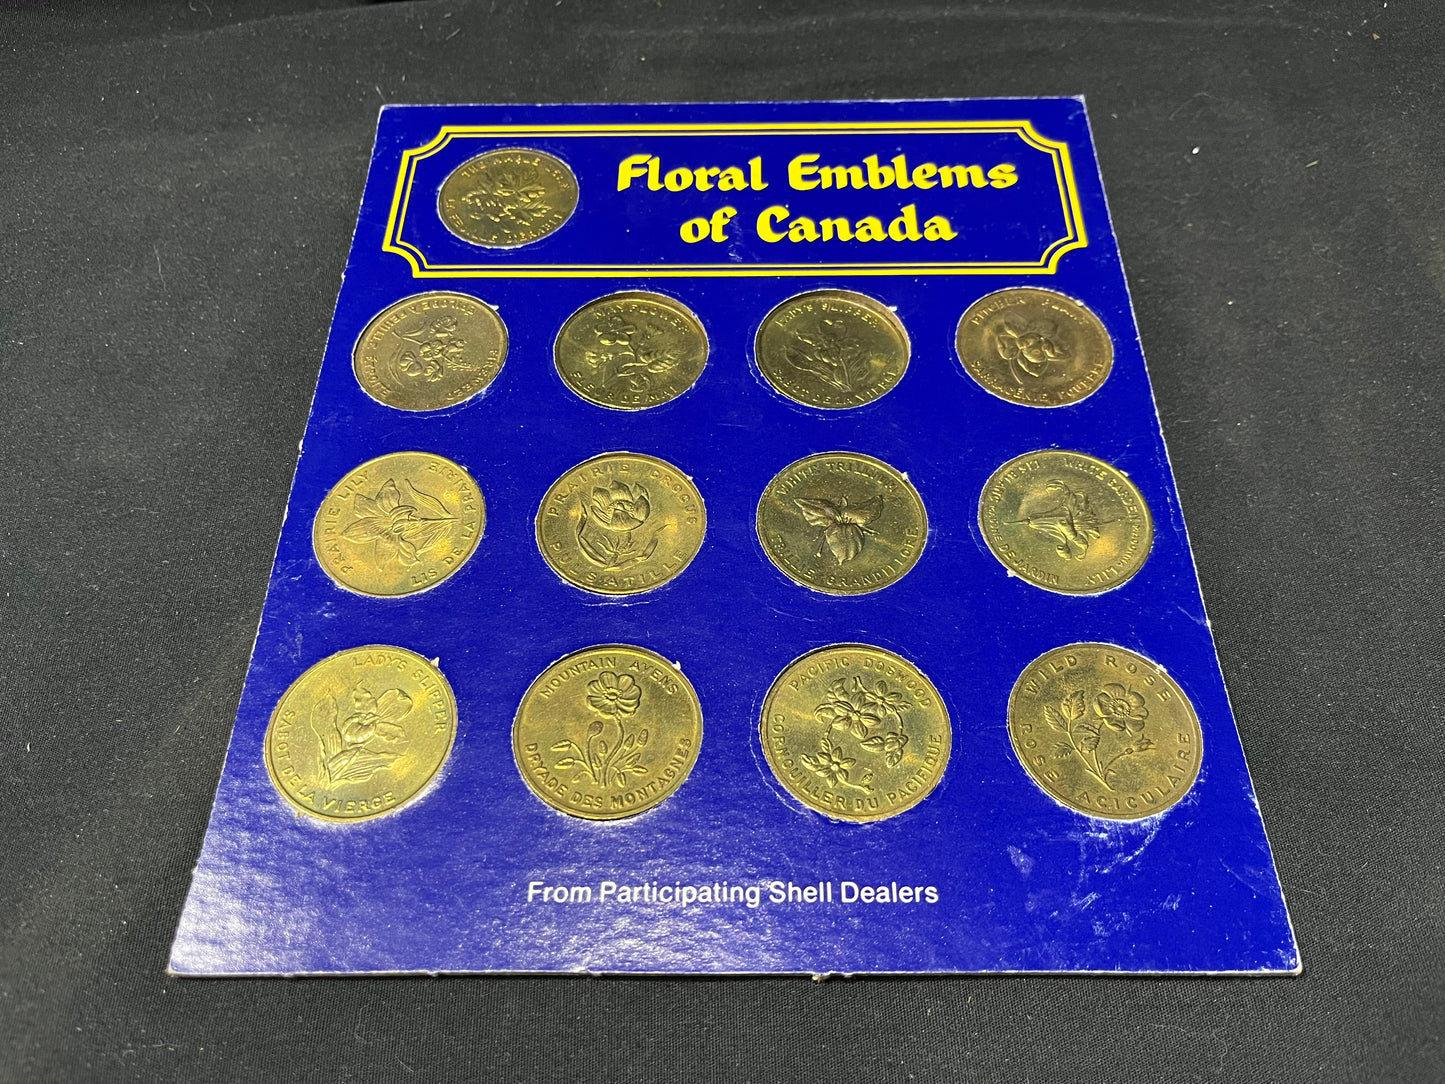 Shell Dealer Promotional Canadian Coin Collection - Incomplete